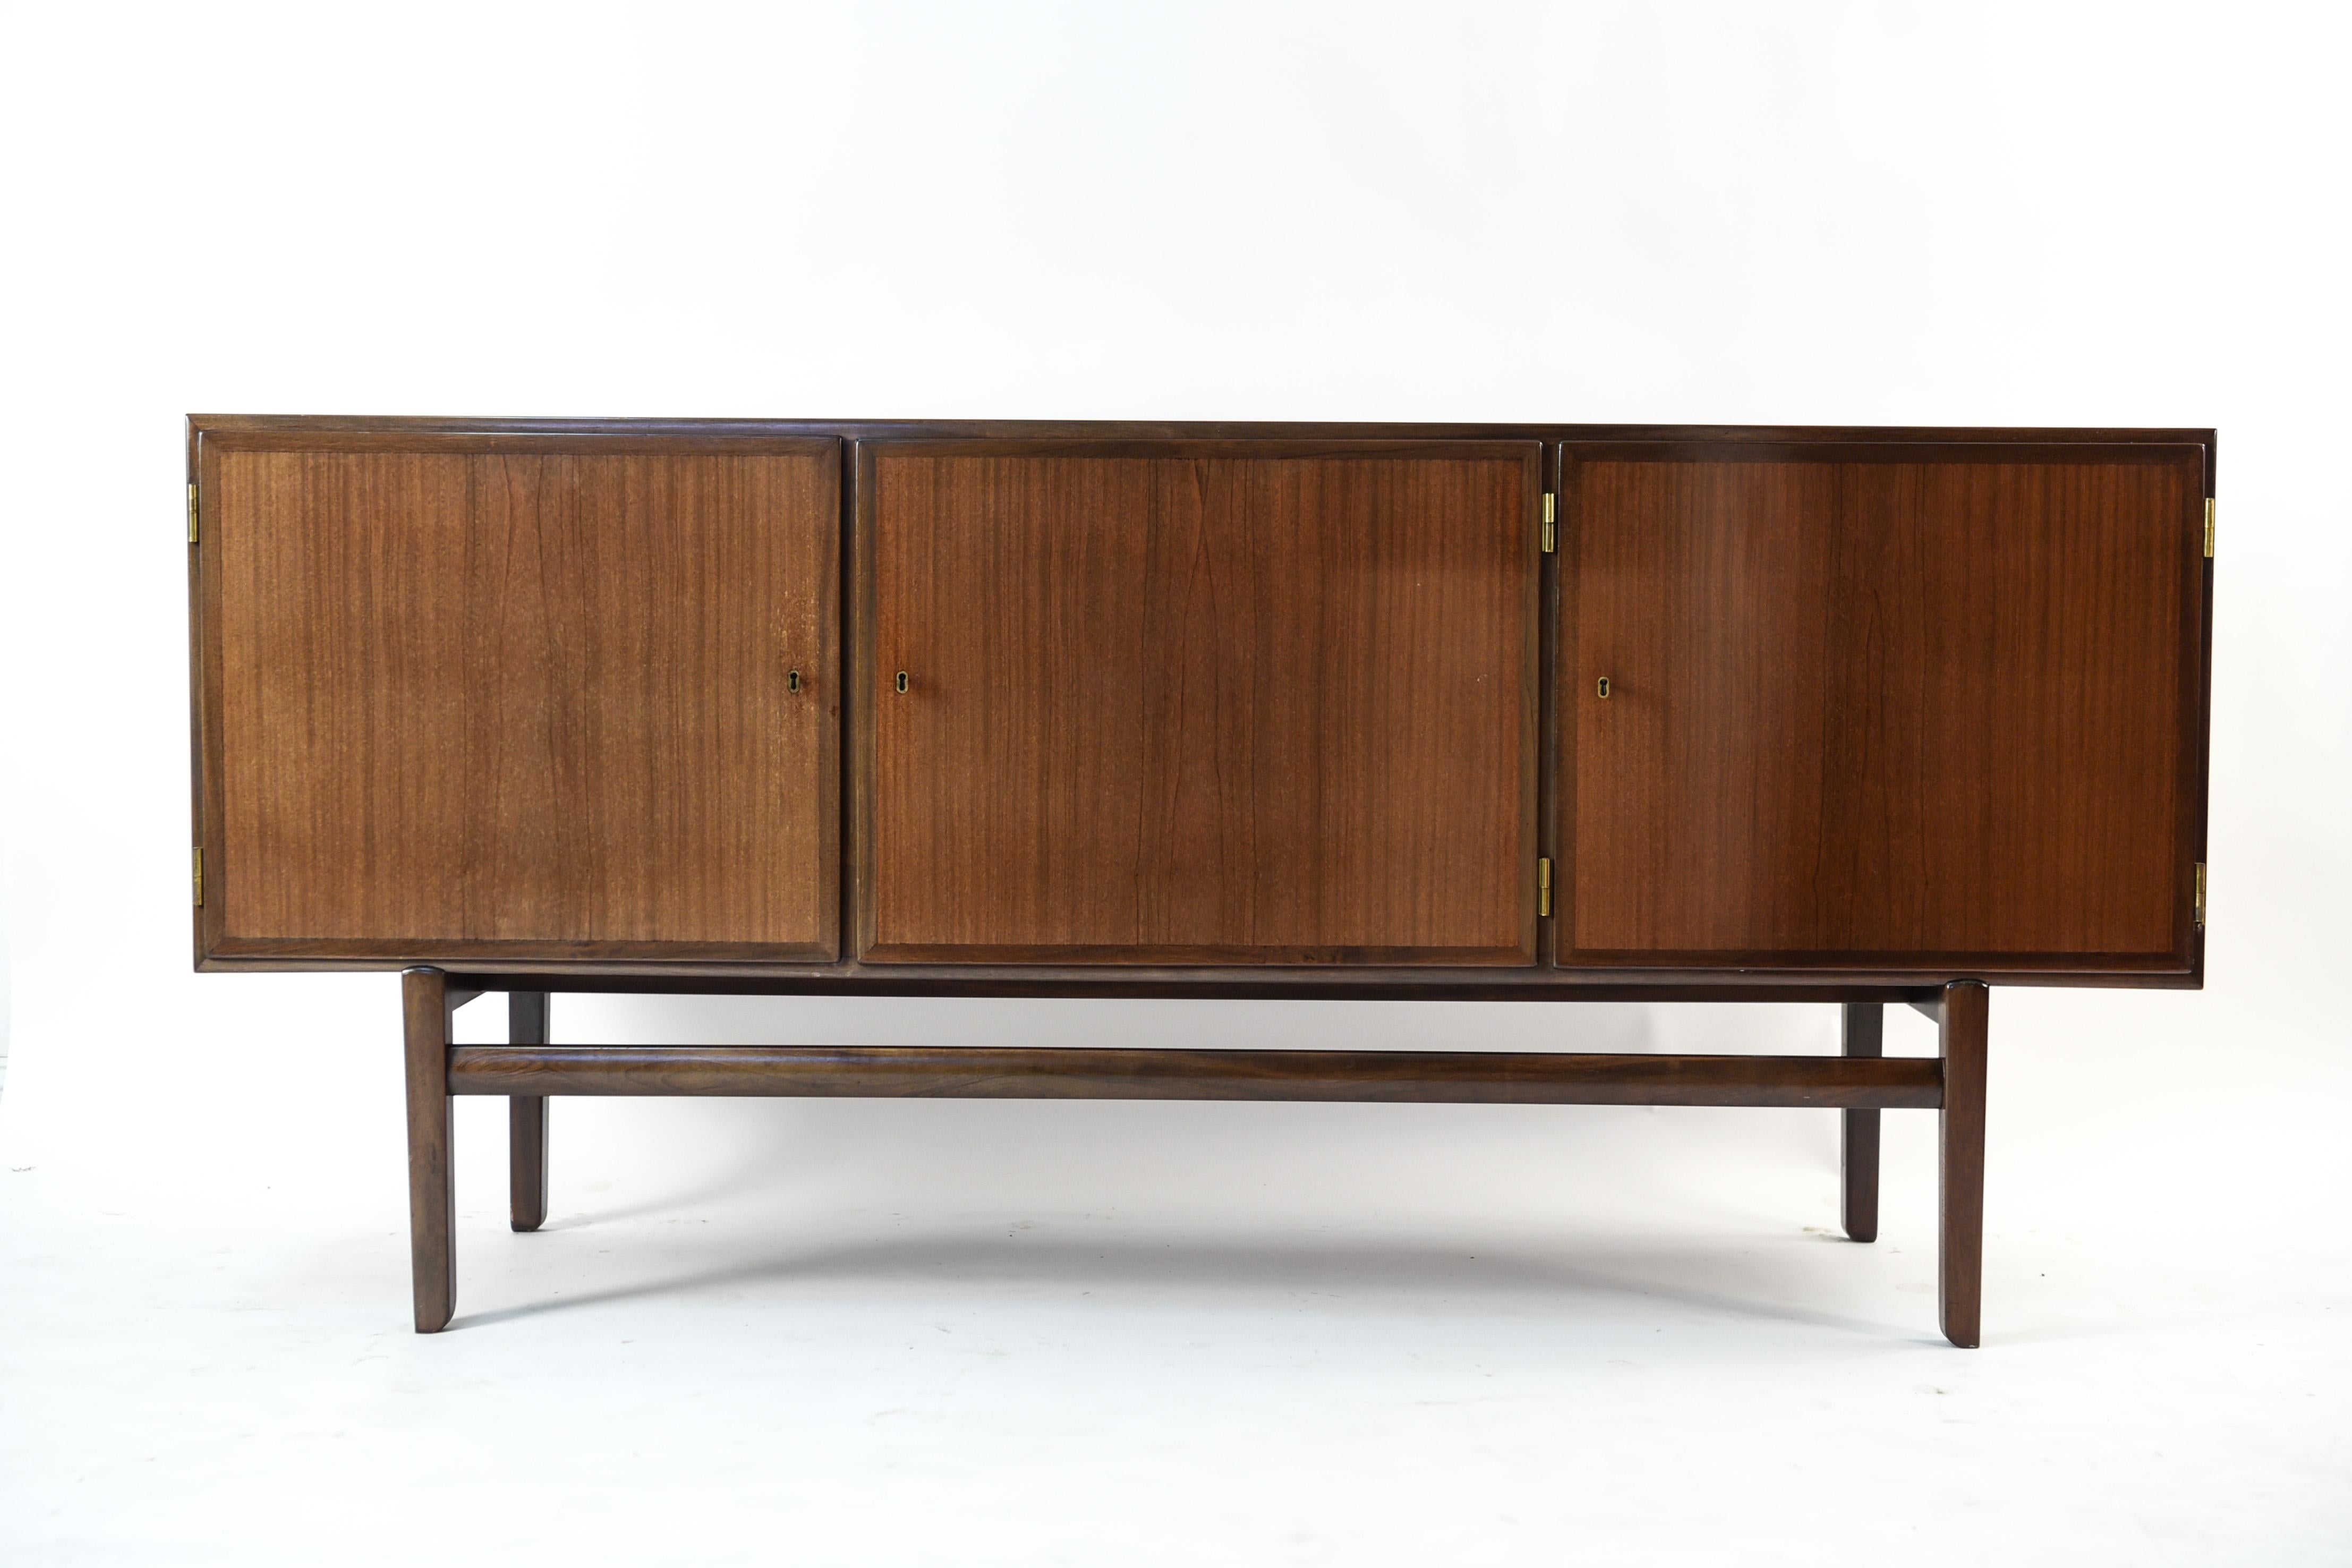 A gorgeous Danish midcentury mahogany Rungstedlund sideboard is part of a dining room set, and was designed for the dining room on Rungstedlund, named after author and adventurer Karen Blixens manor house in Rungsted, north of Copenhagen, called